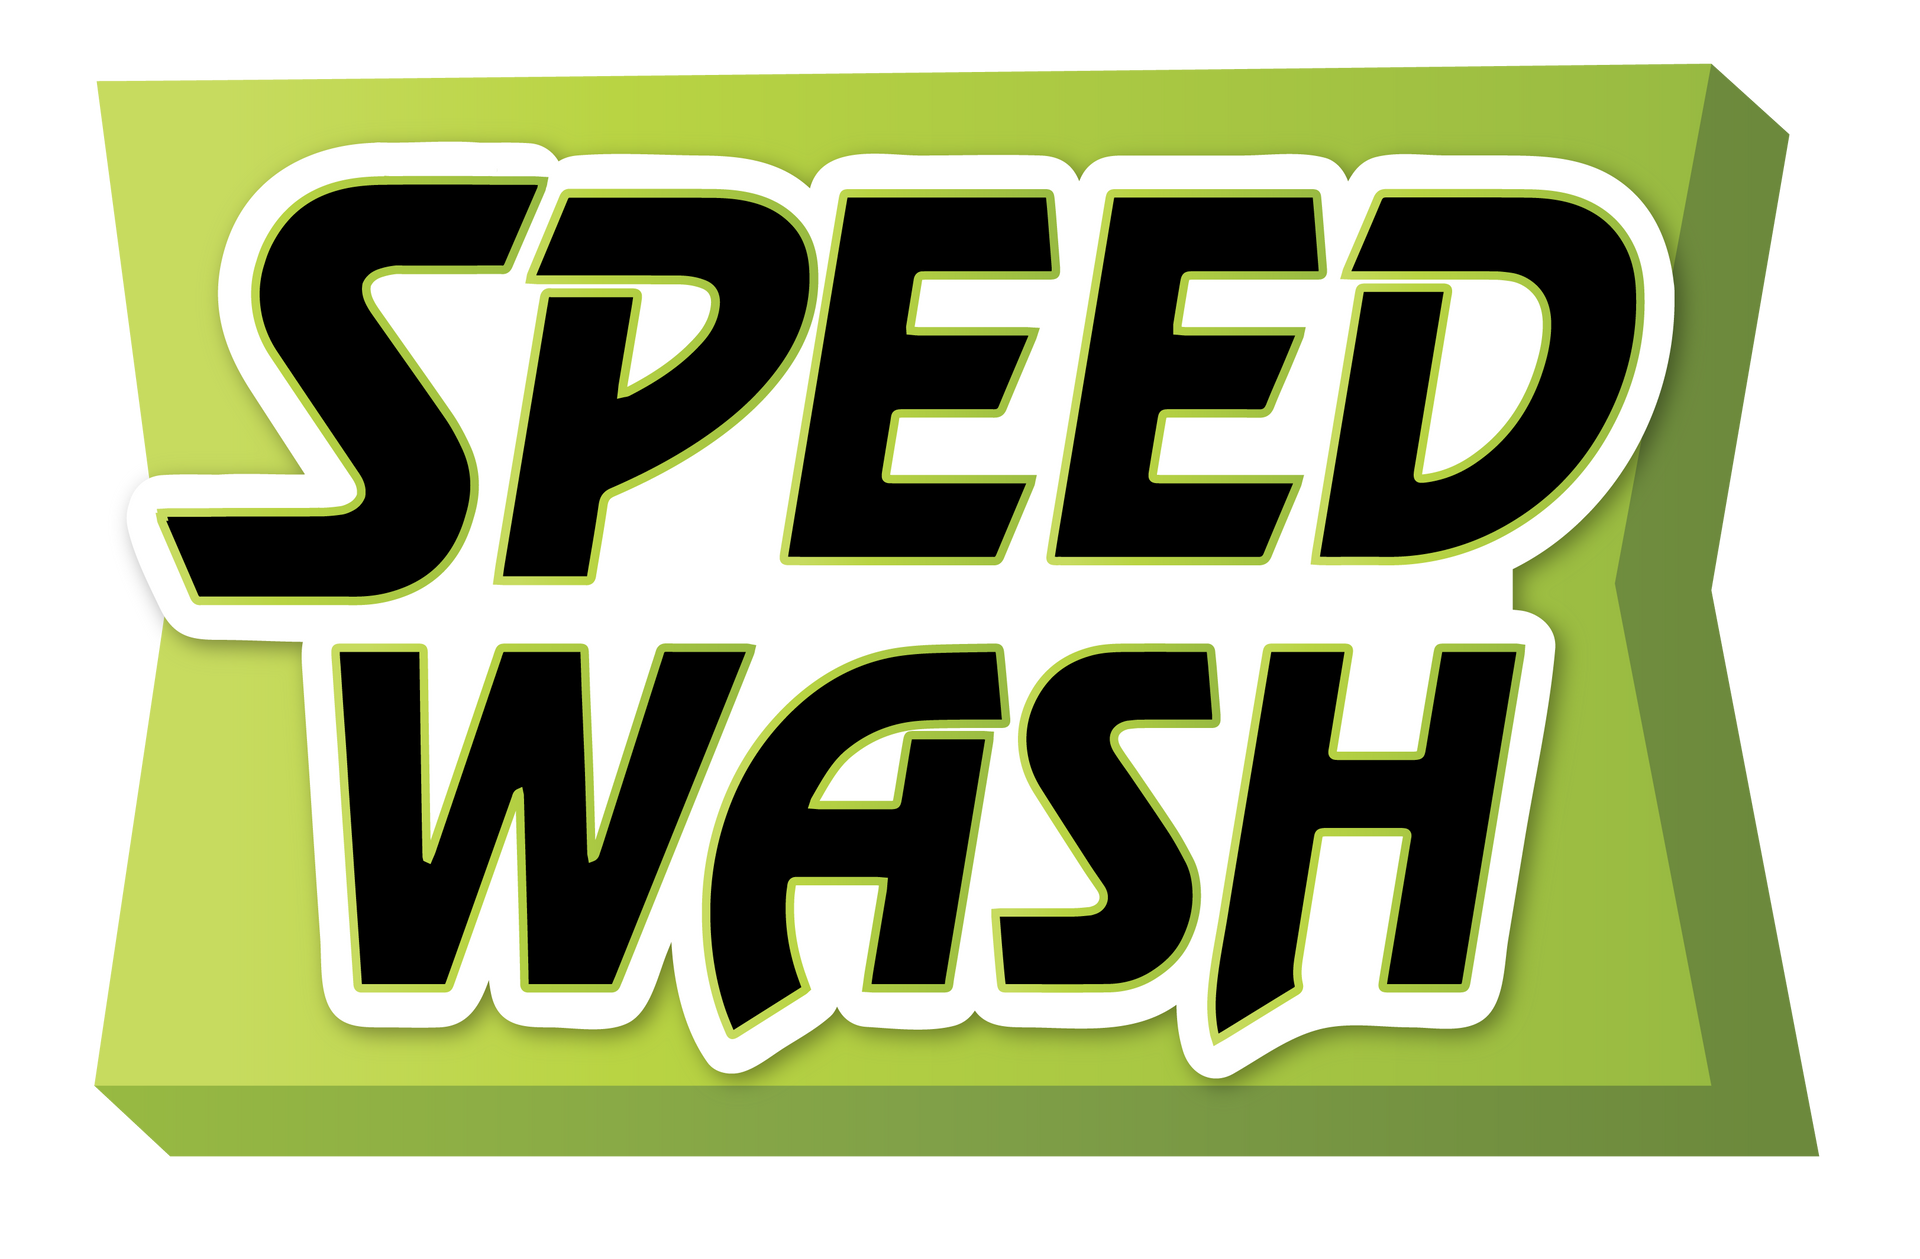 Catalina and Silverlake Speedwash - googie carwash with a classic California design logo